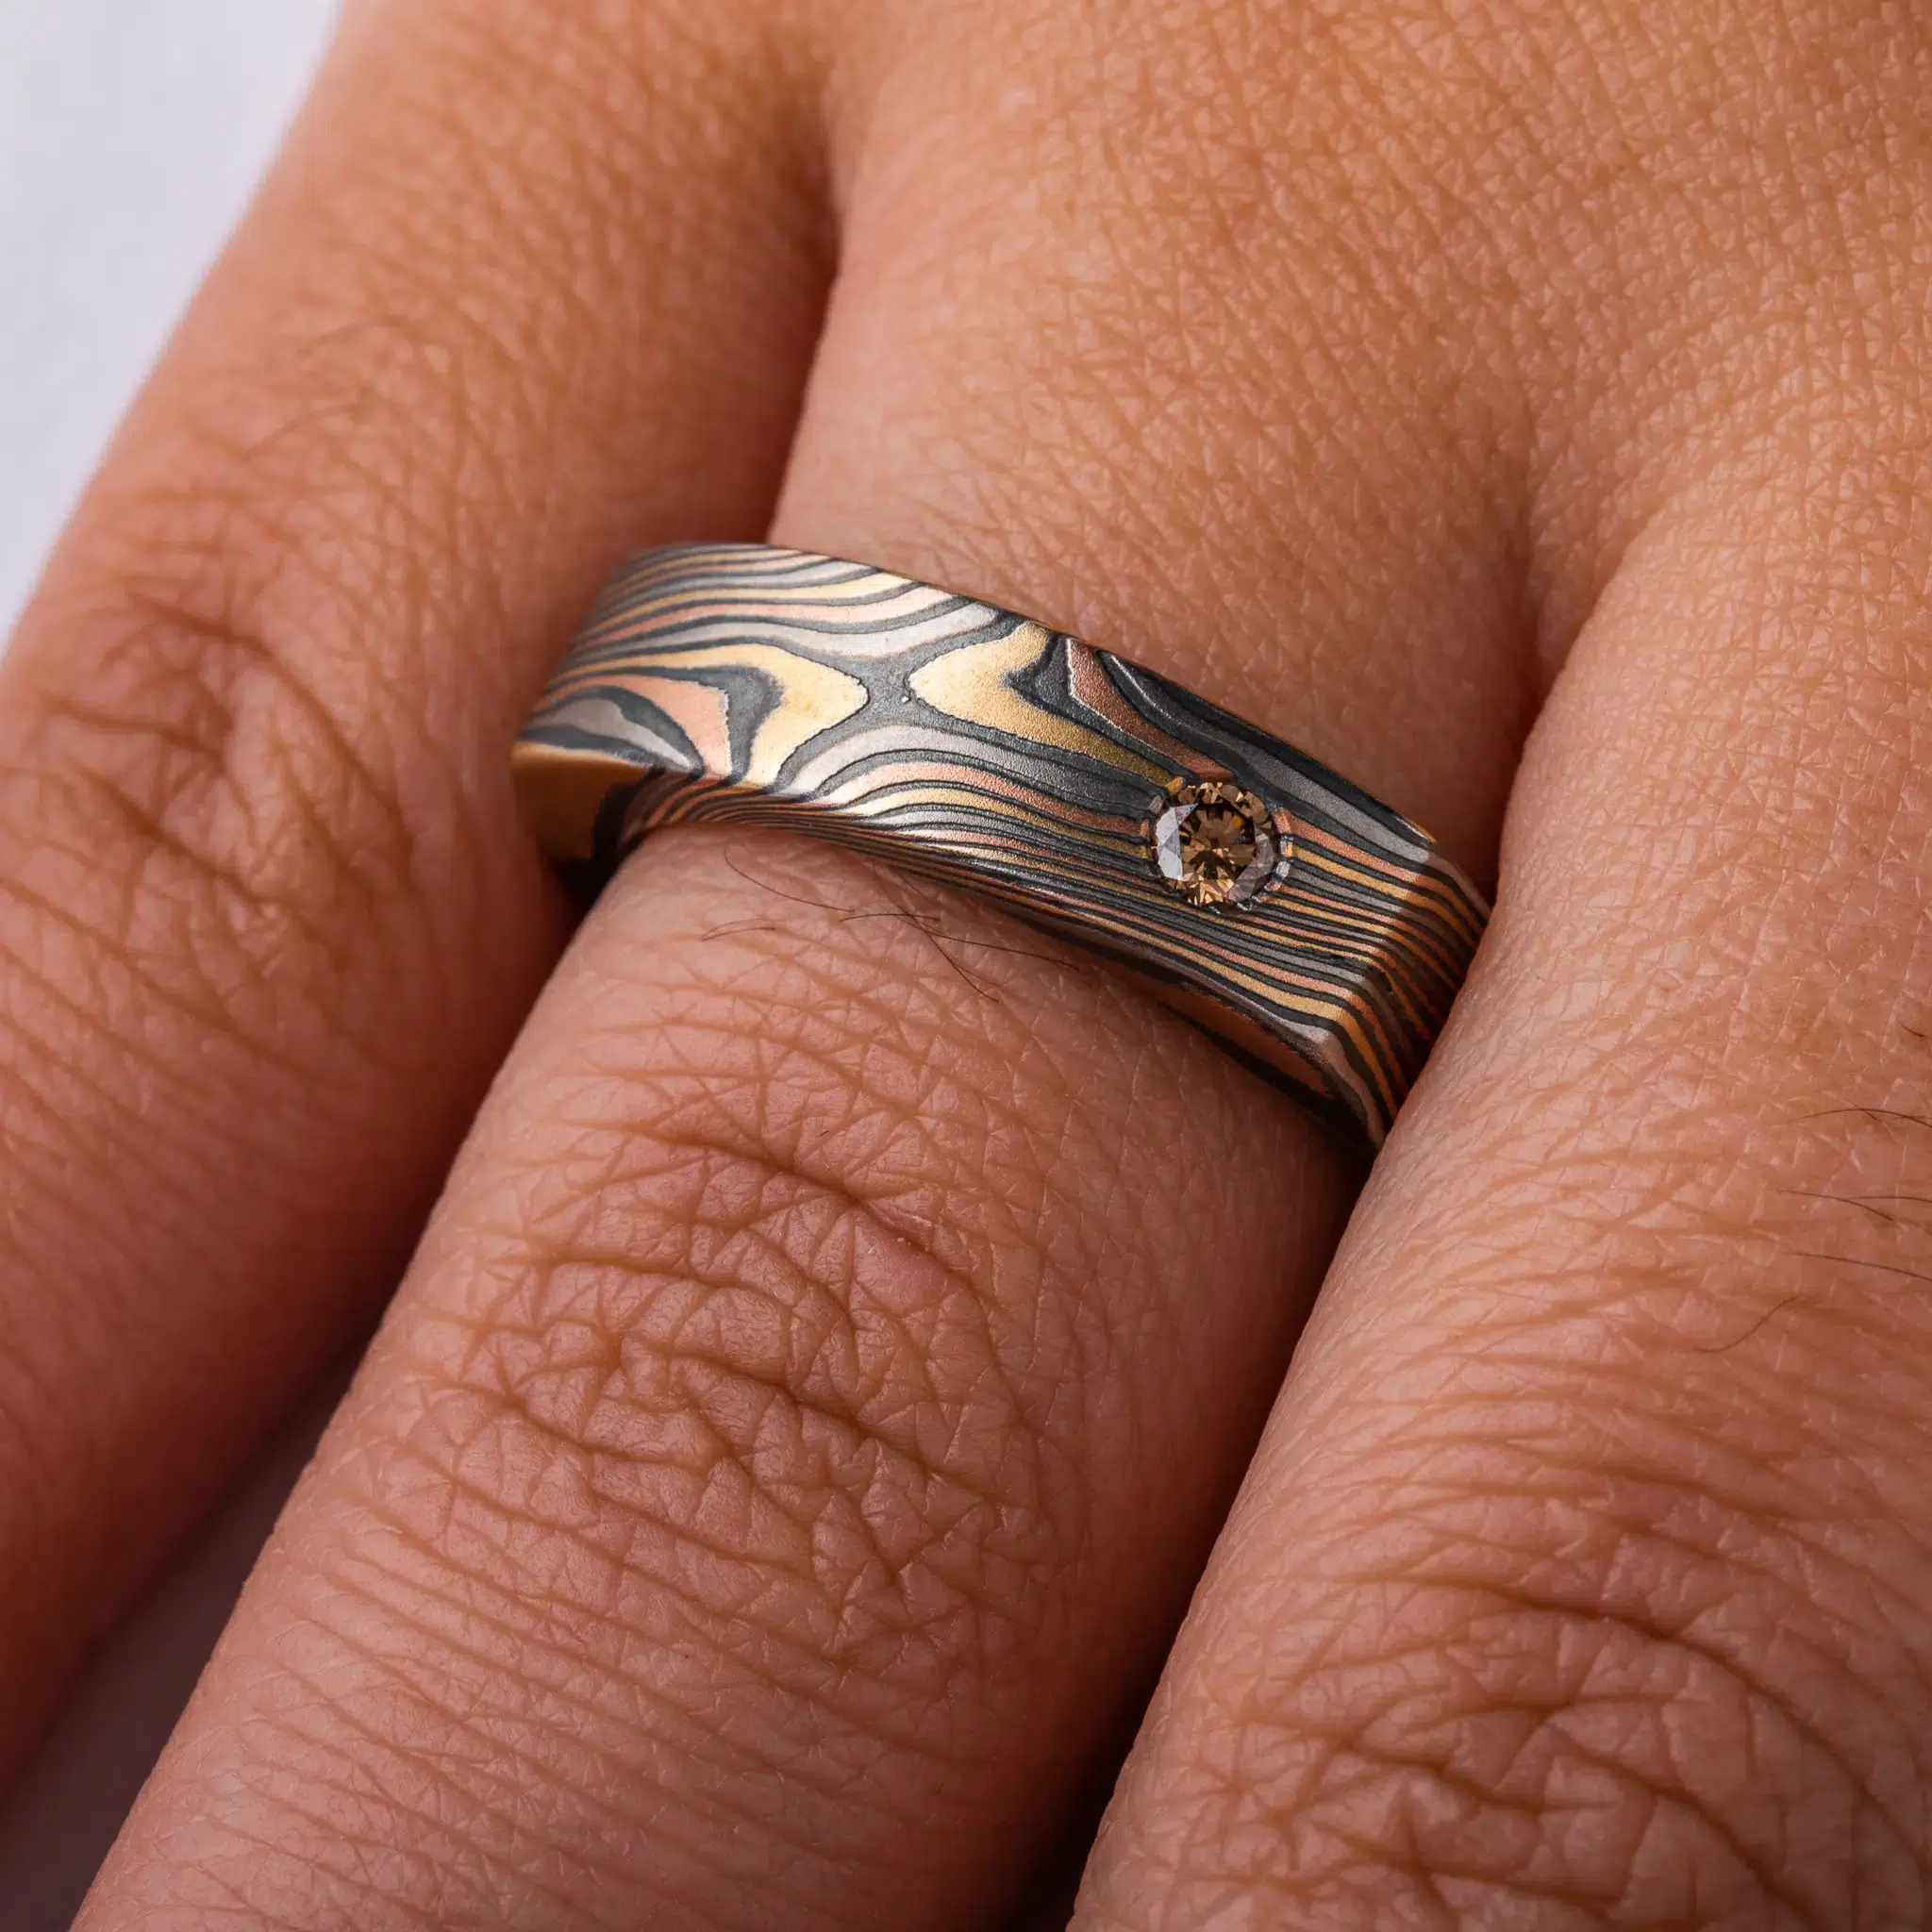 uniquely profiled soft square shaped mokume gane ring with a thicker top section - somewhat similar to a signet style ring, but rectangular, with a small cognac diamond flush set into a corner